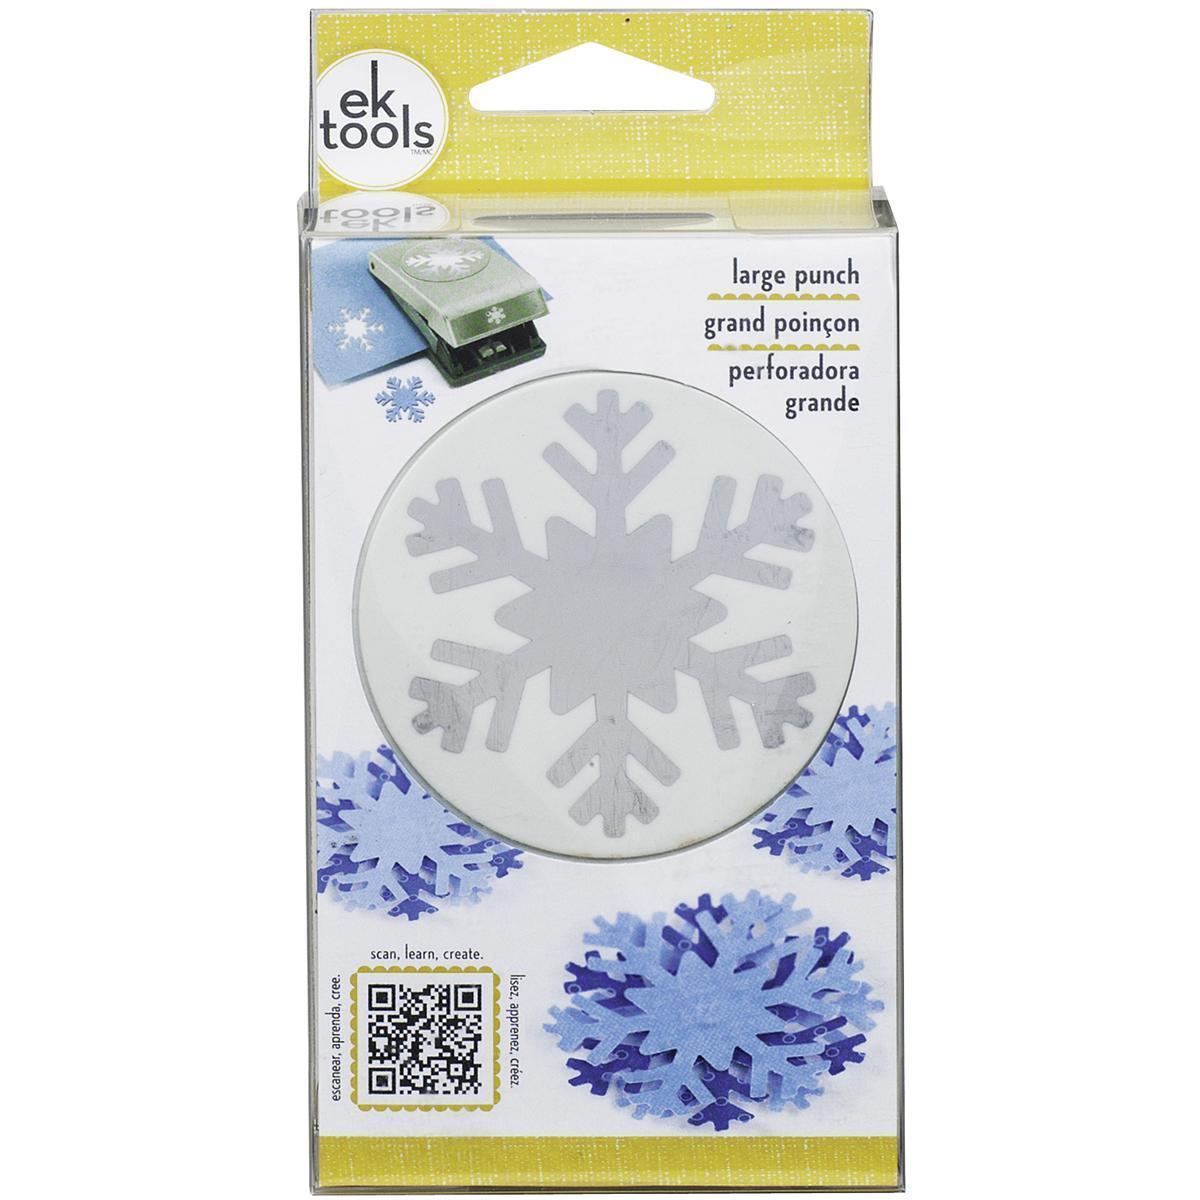 Success Snowflake Hole Punch Printable